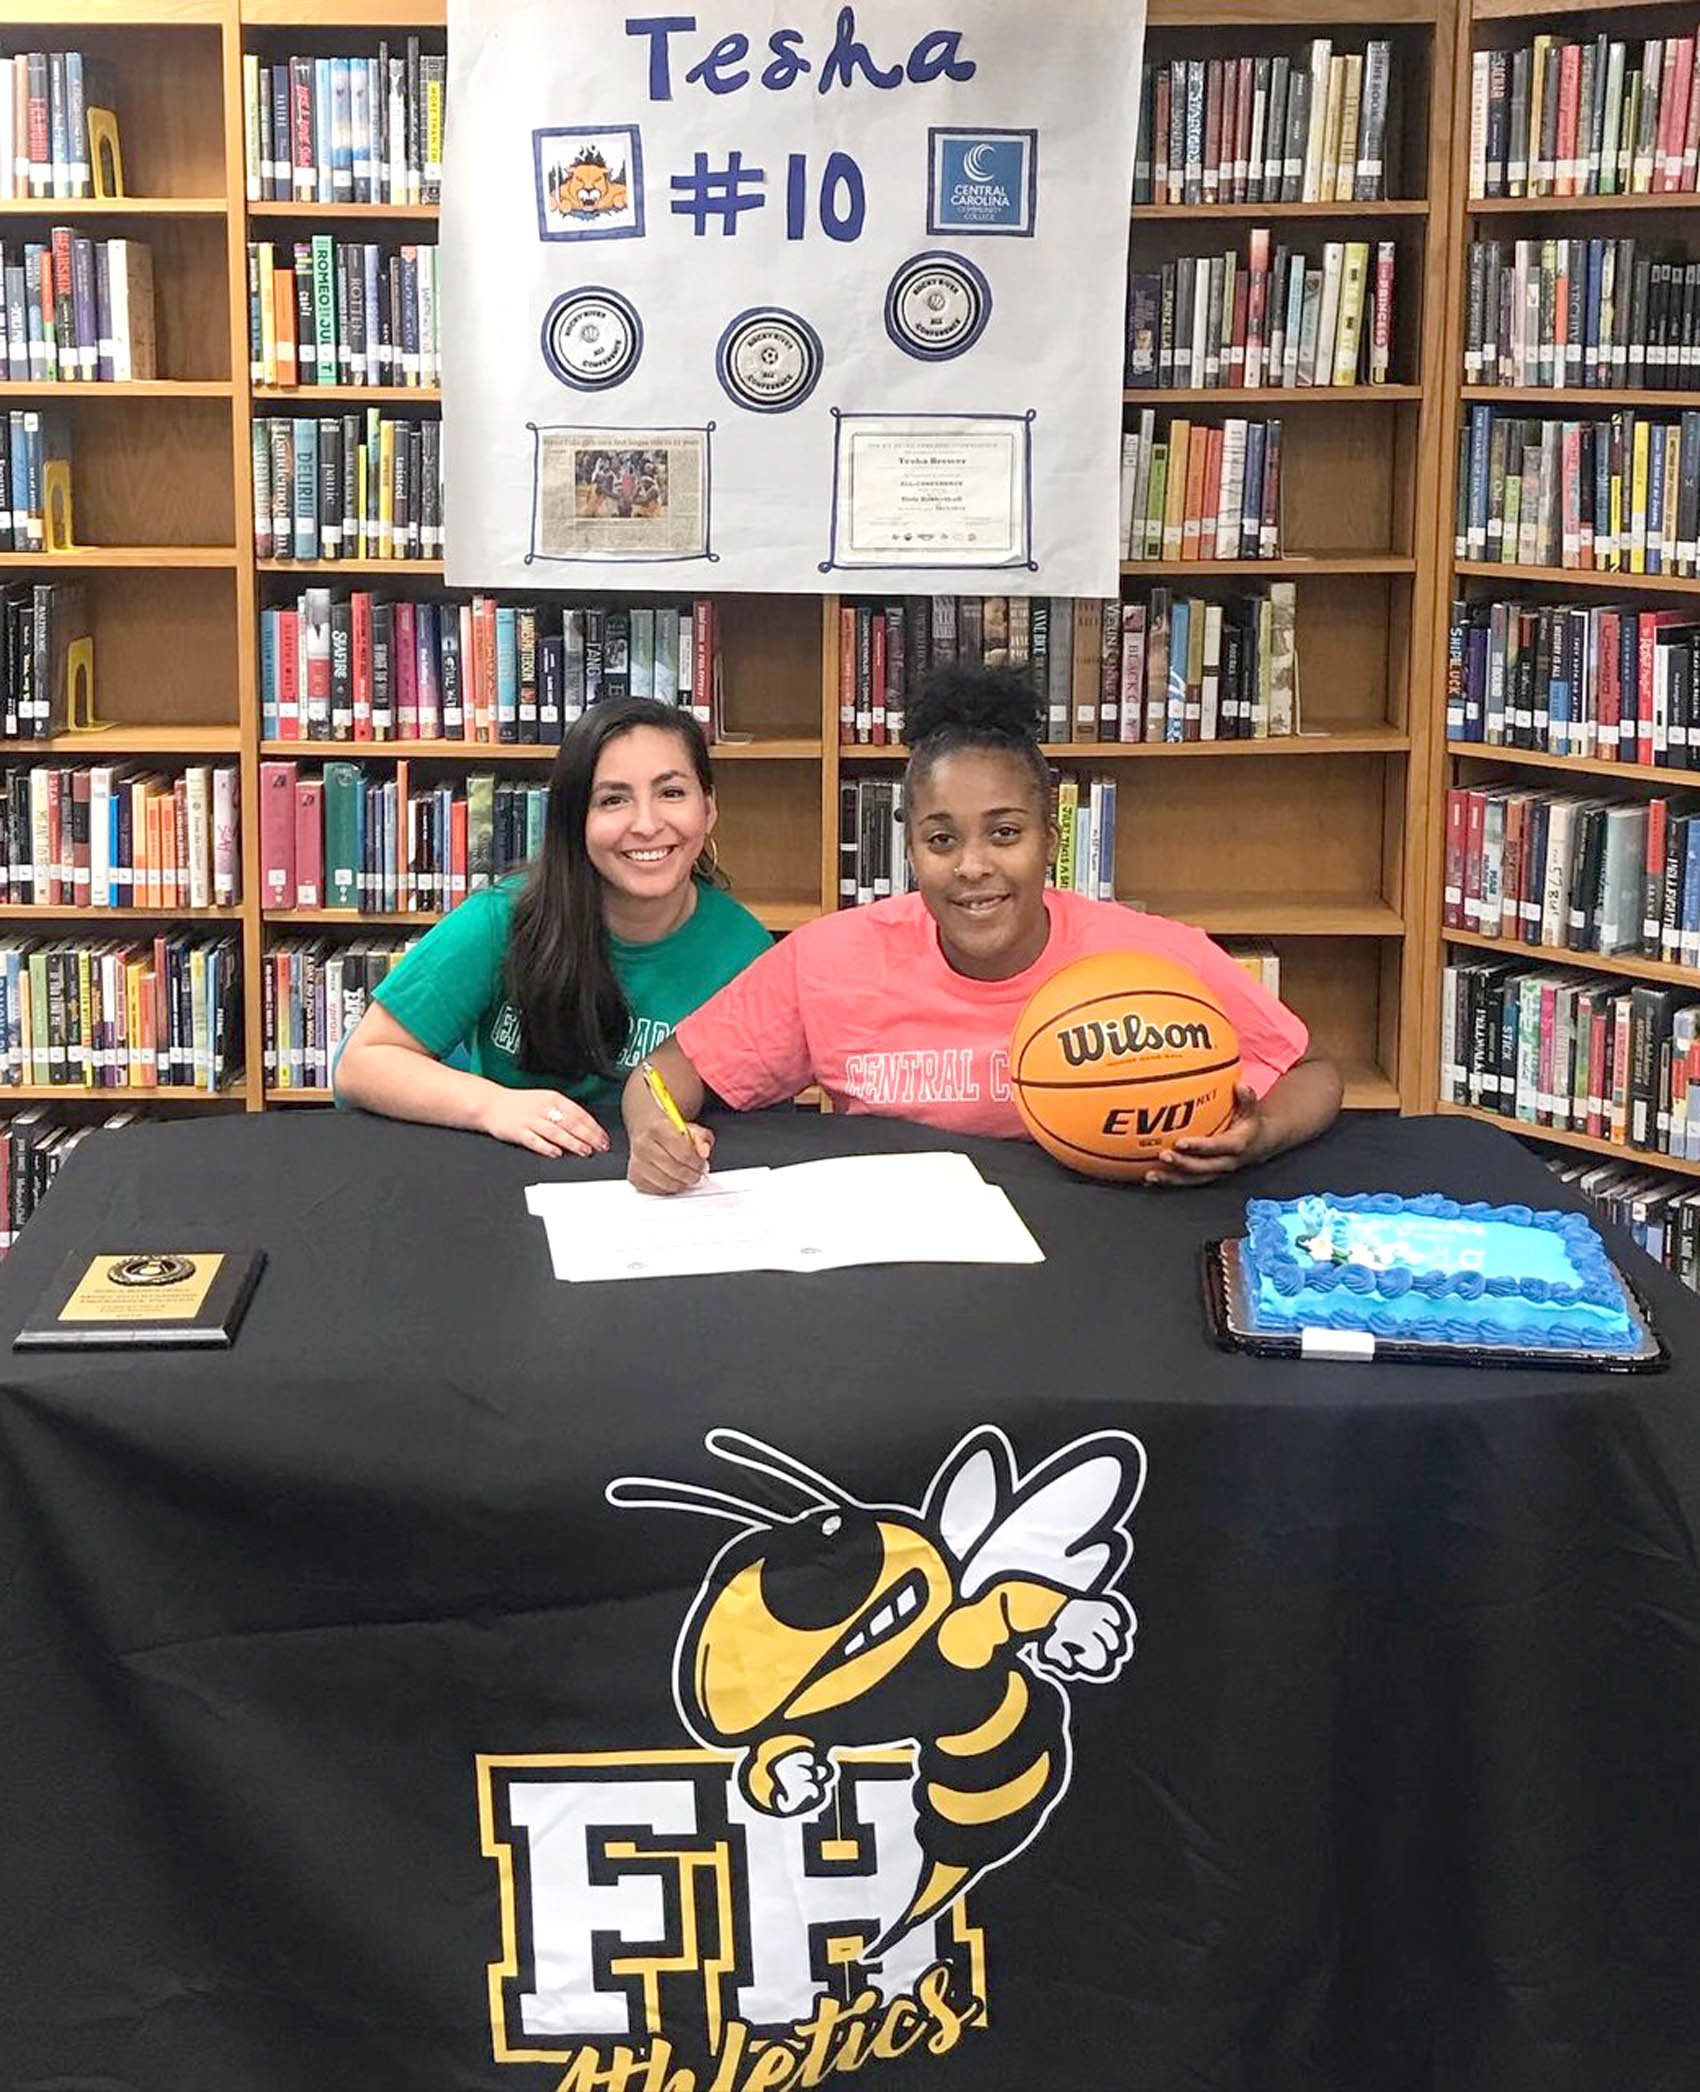 Brewer to join CCCC women's basketball program